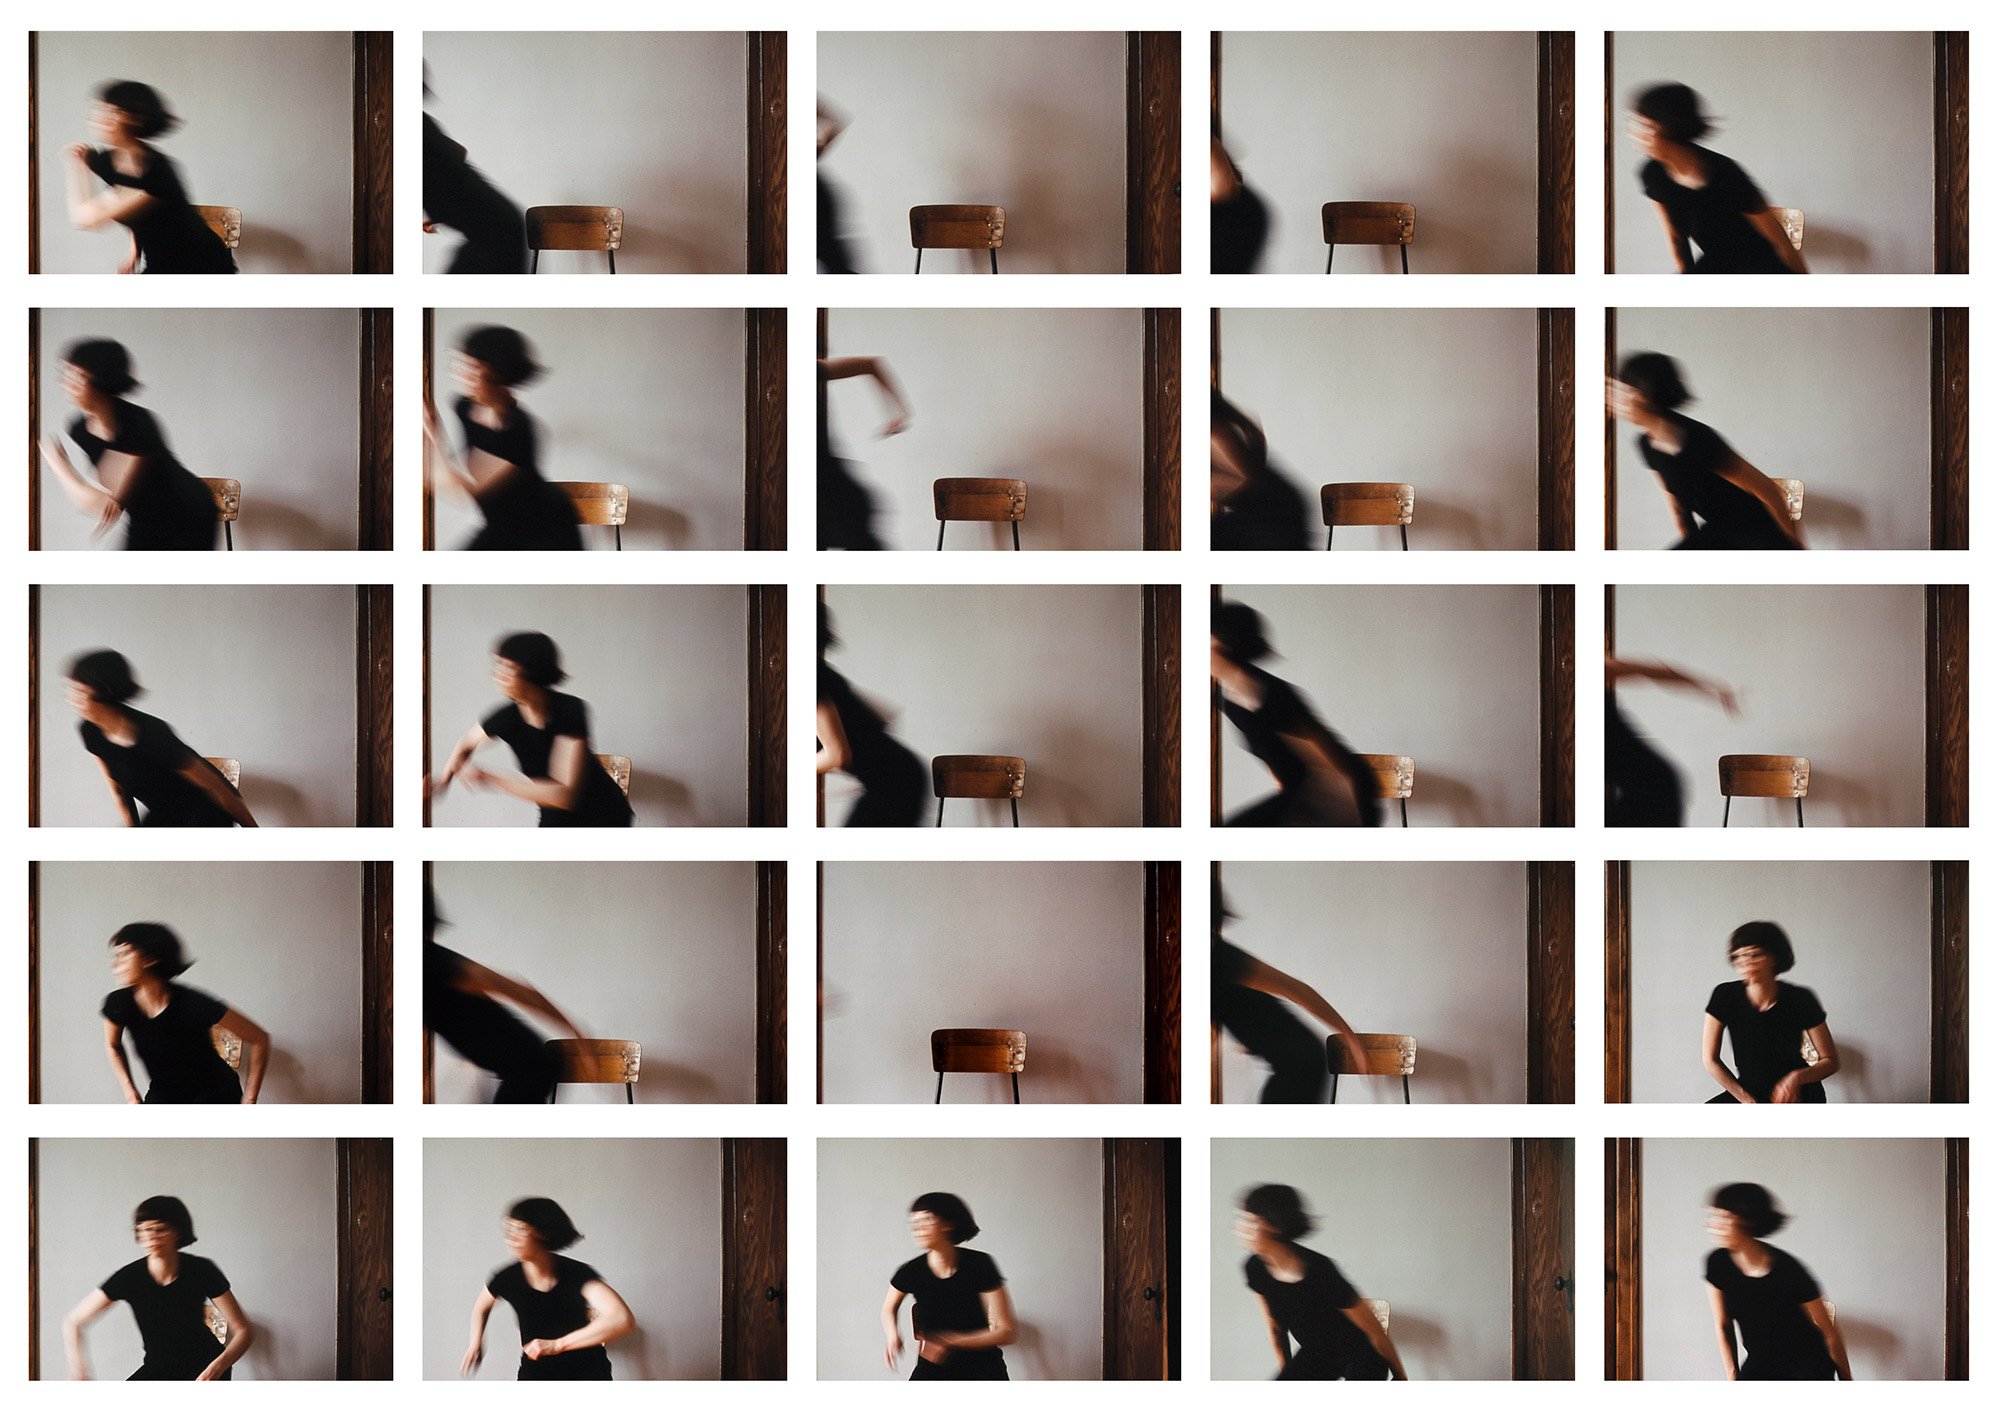   Past work: Manoushka Larouche,  How far I can get from the Camera  (2017)   As a response to the writings of conceptual artist Keith Arnatt, Larouche follows his instructions by “running away from the camera.” These instructions propose physical st